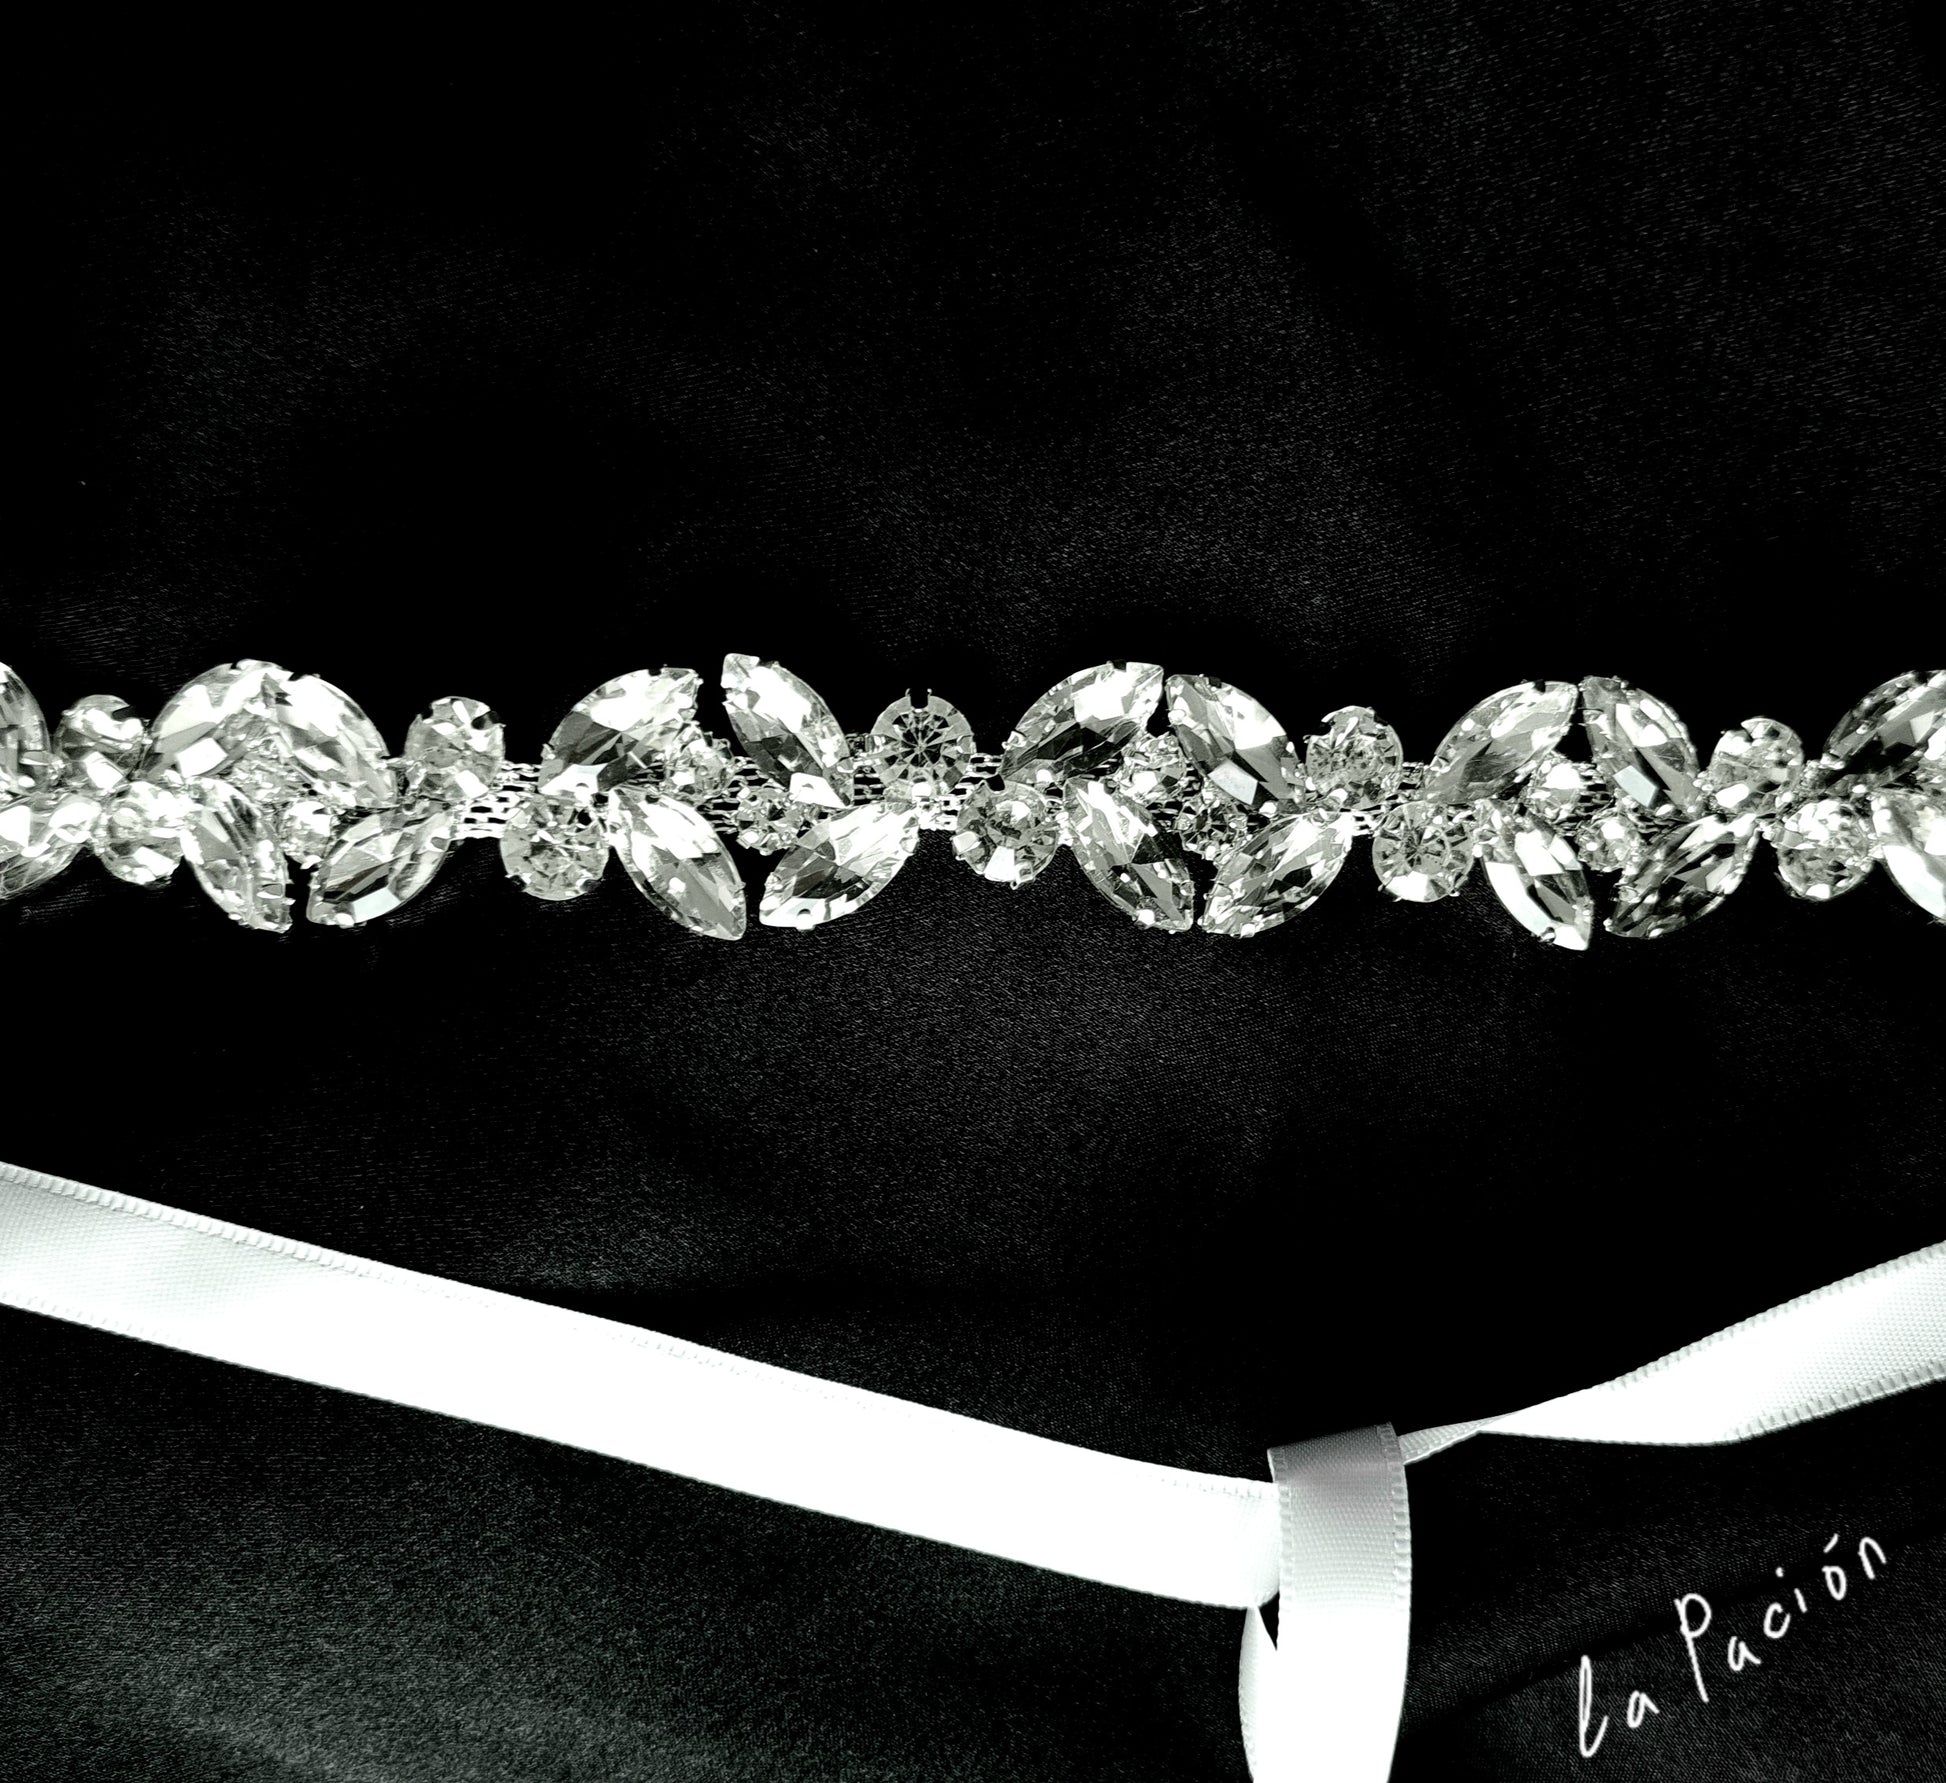 Emmy bridal belt, showcasing its intricate design and shimmering crystals.